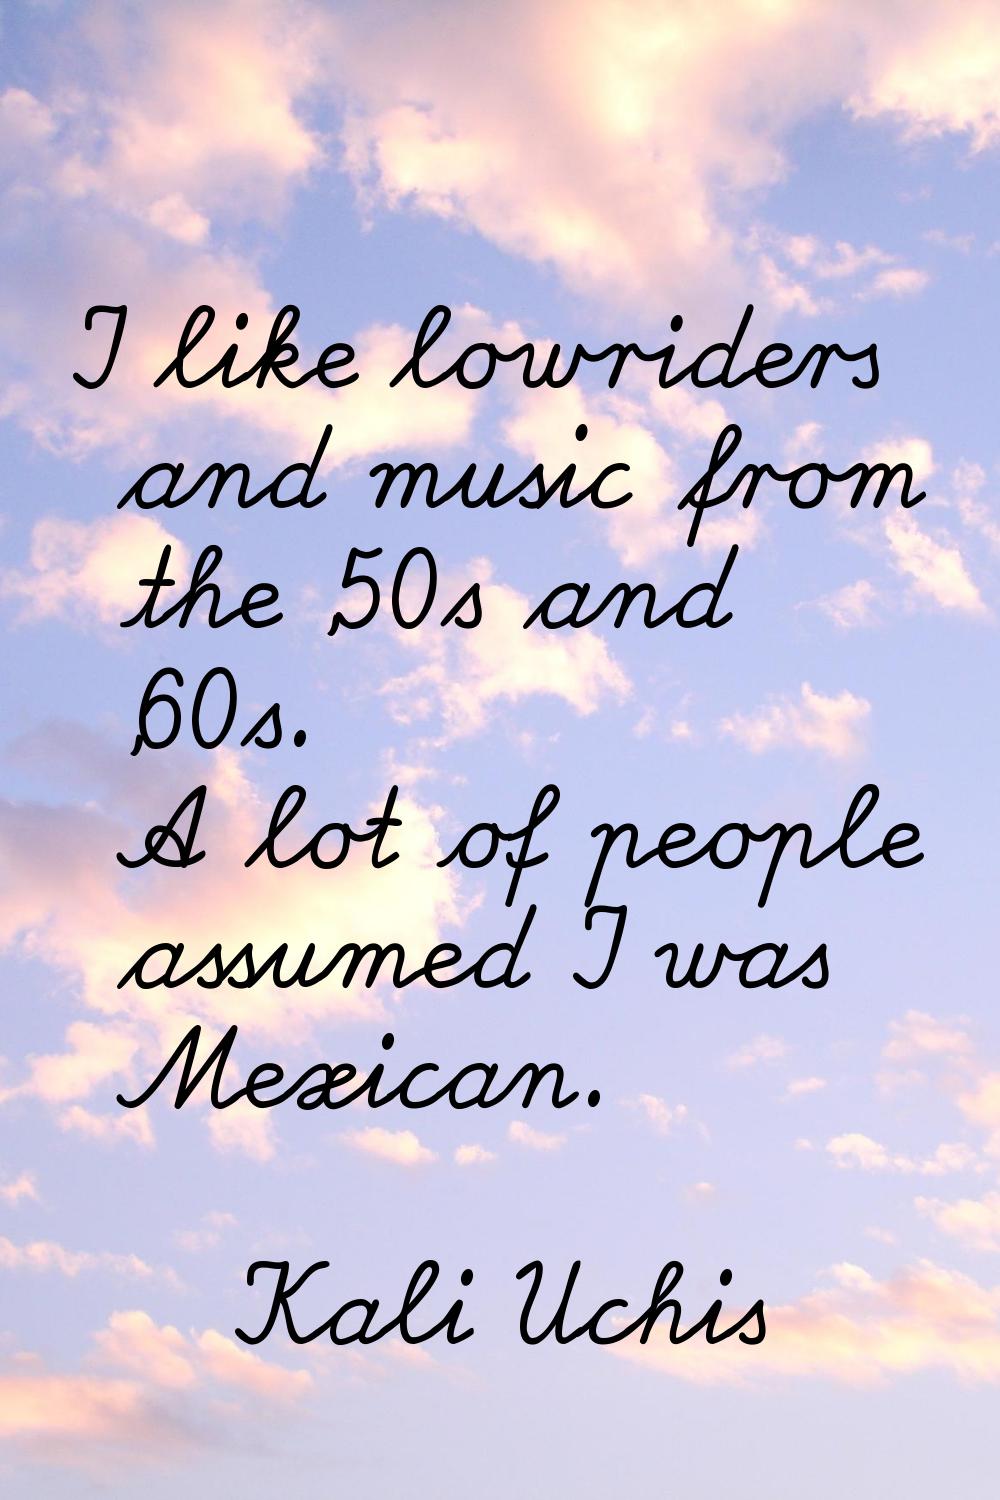 I like lowriders and music from the '50s and '60s. A lot of people assumed I was Mexican.